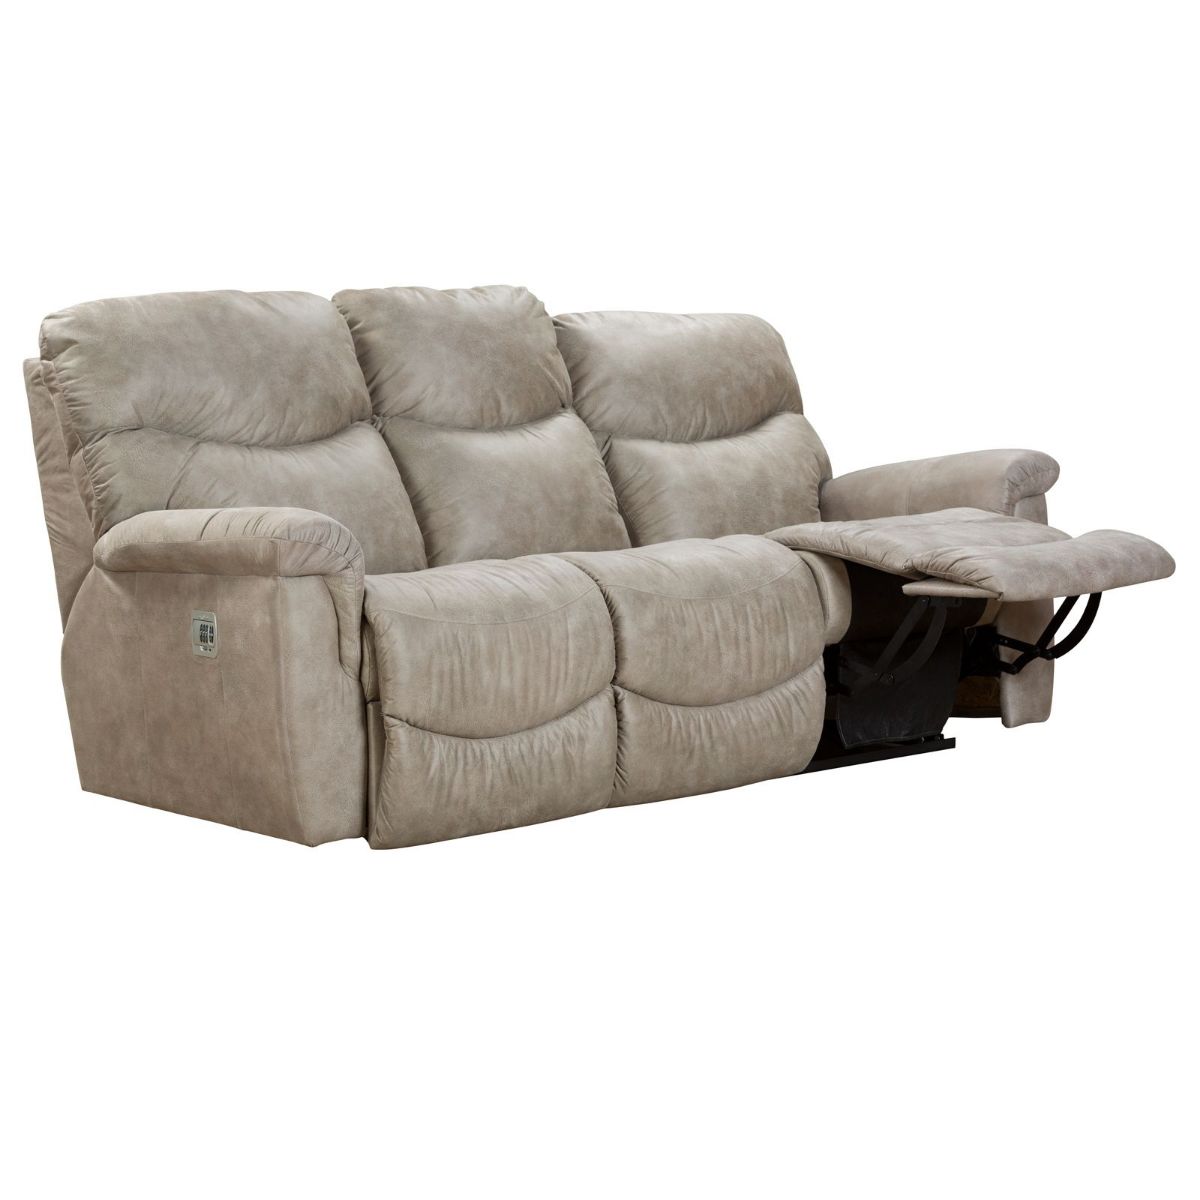 Picture of James Pebble Power Recliner Sofa